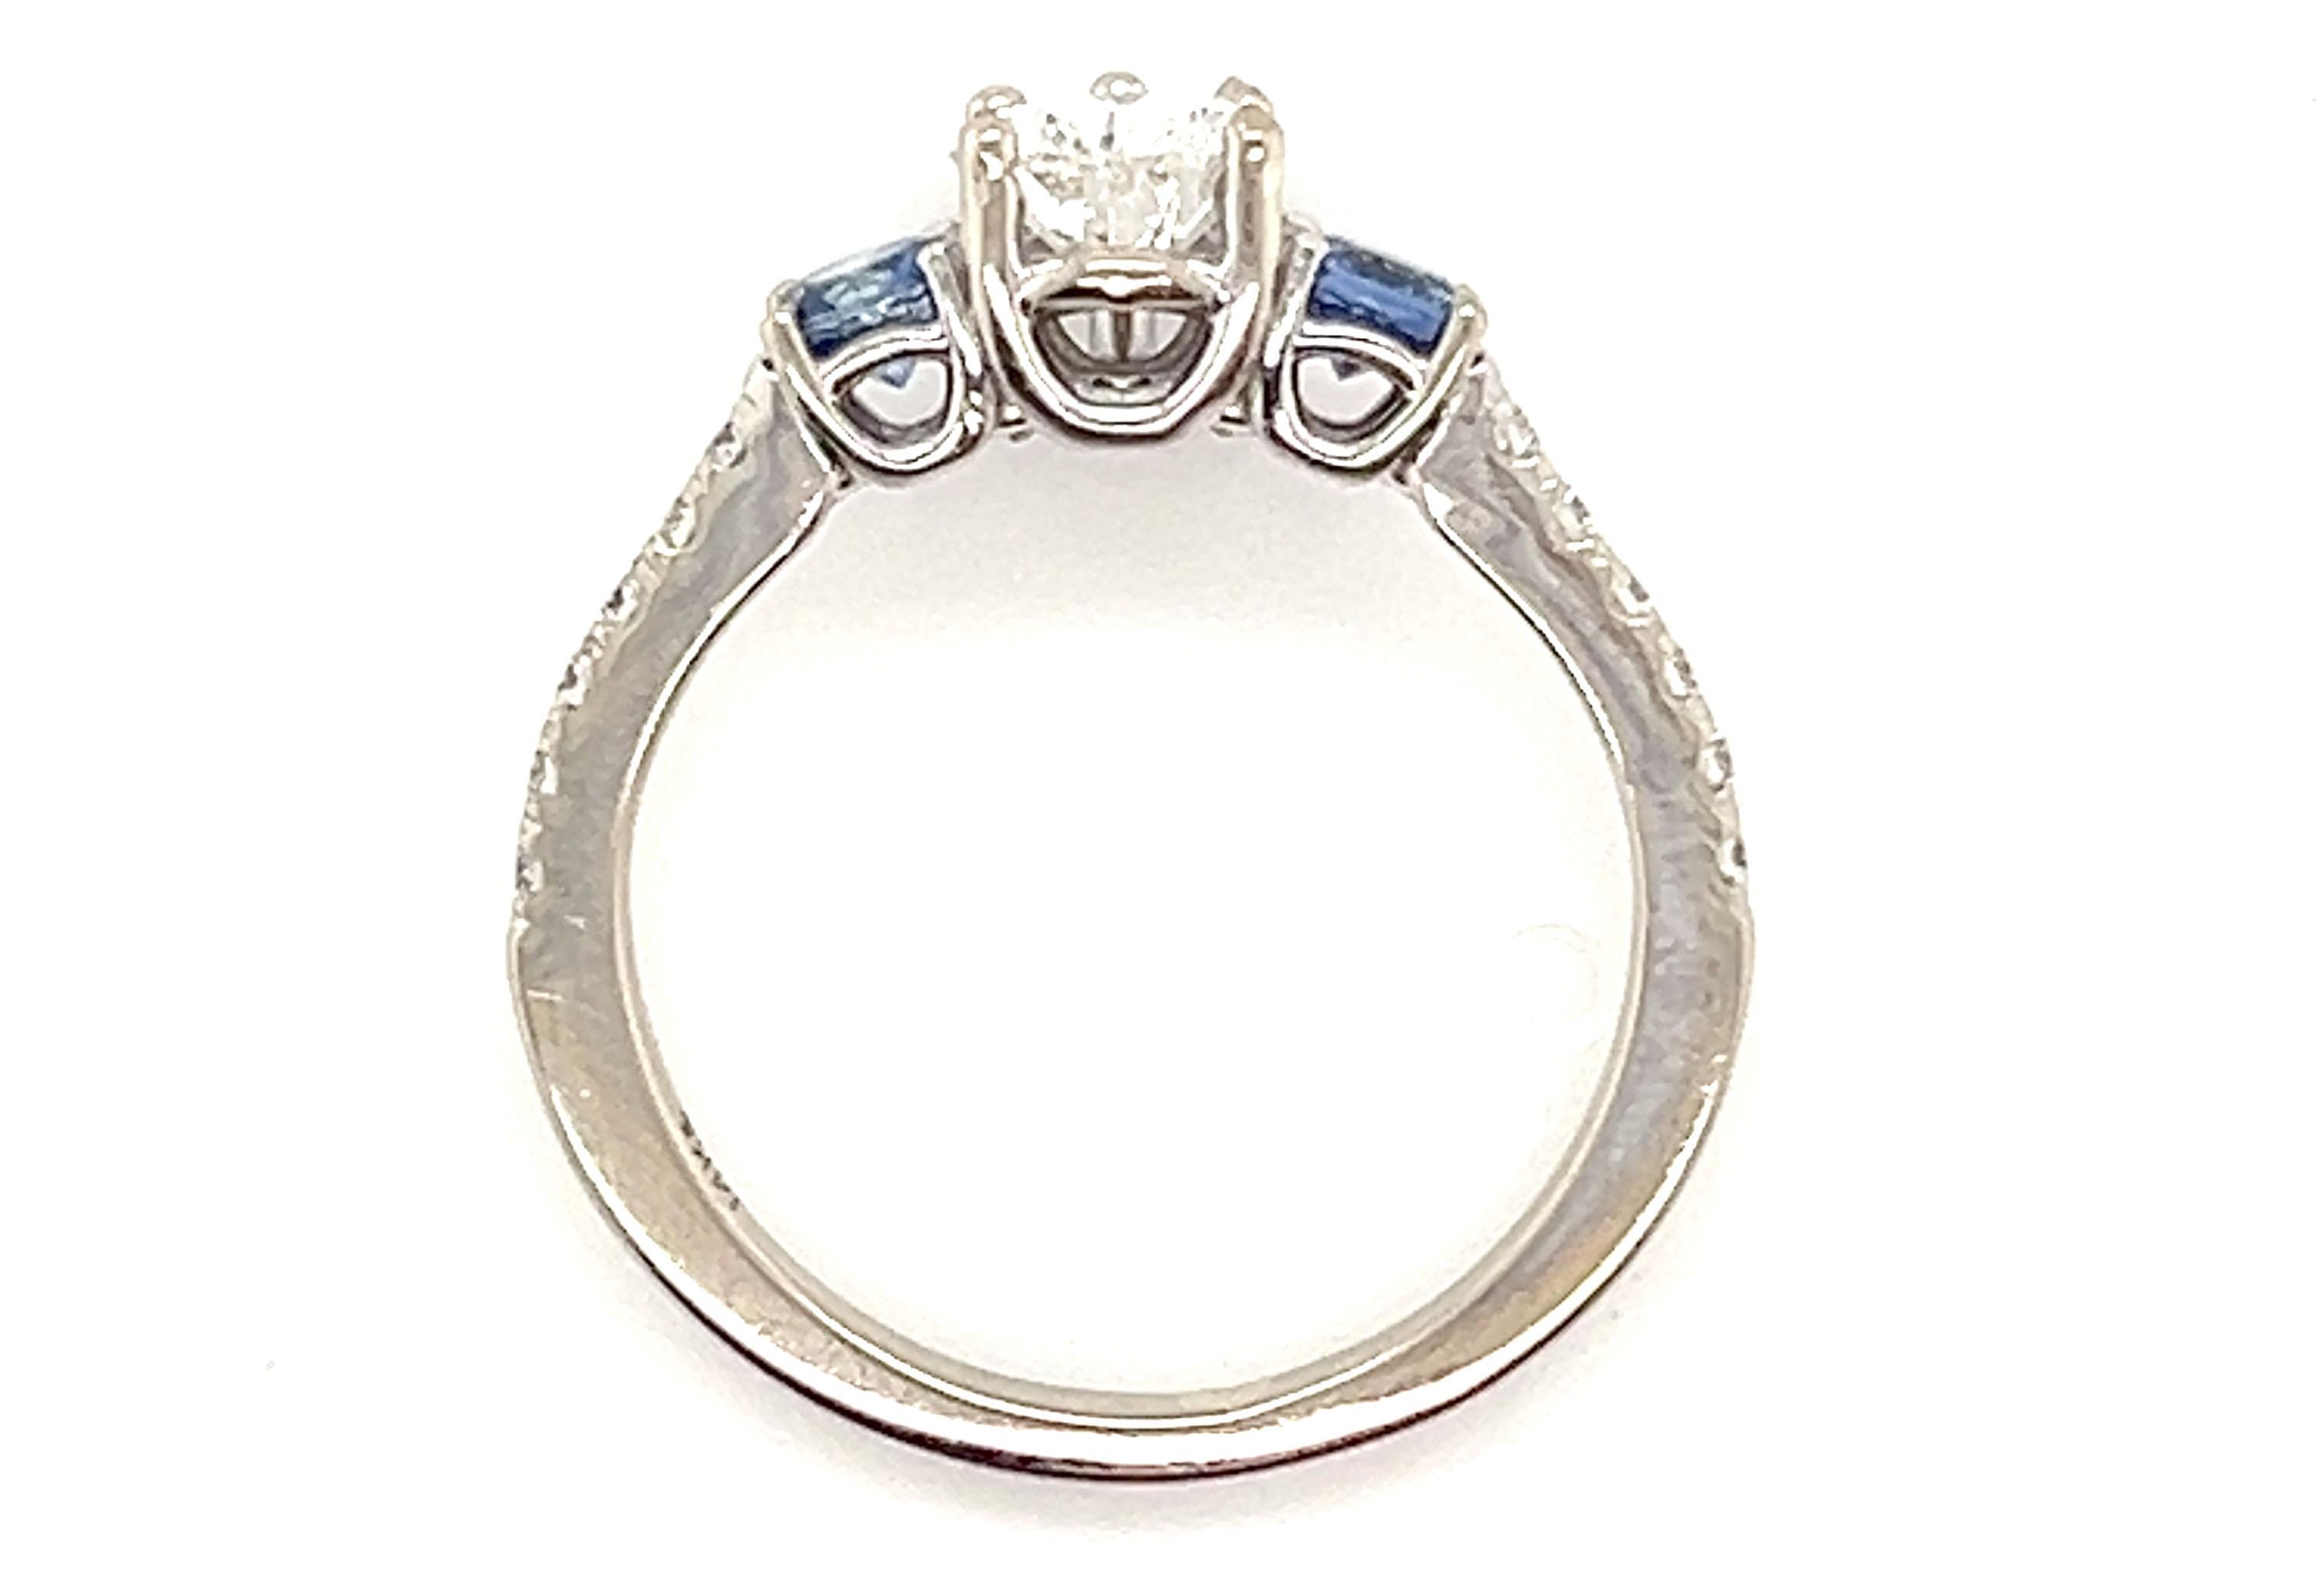 Diamond Sapphire Engagement Ring Pear Cut 1.50 Carat 14K White Gold


Featuring a Stunning .80ct F-G/VS1-SI1 Genuine Natural Mined Pear Cut Diamond Center

Center Diamond flanked by Diamond Cut Sapphire Gemstones

Classic Engagement Ring

Way Below